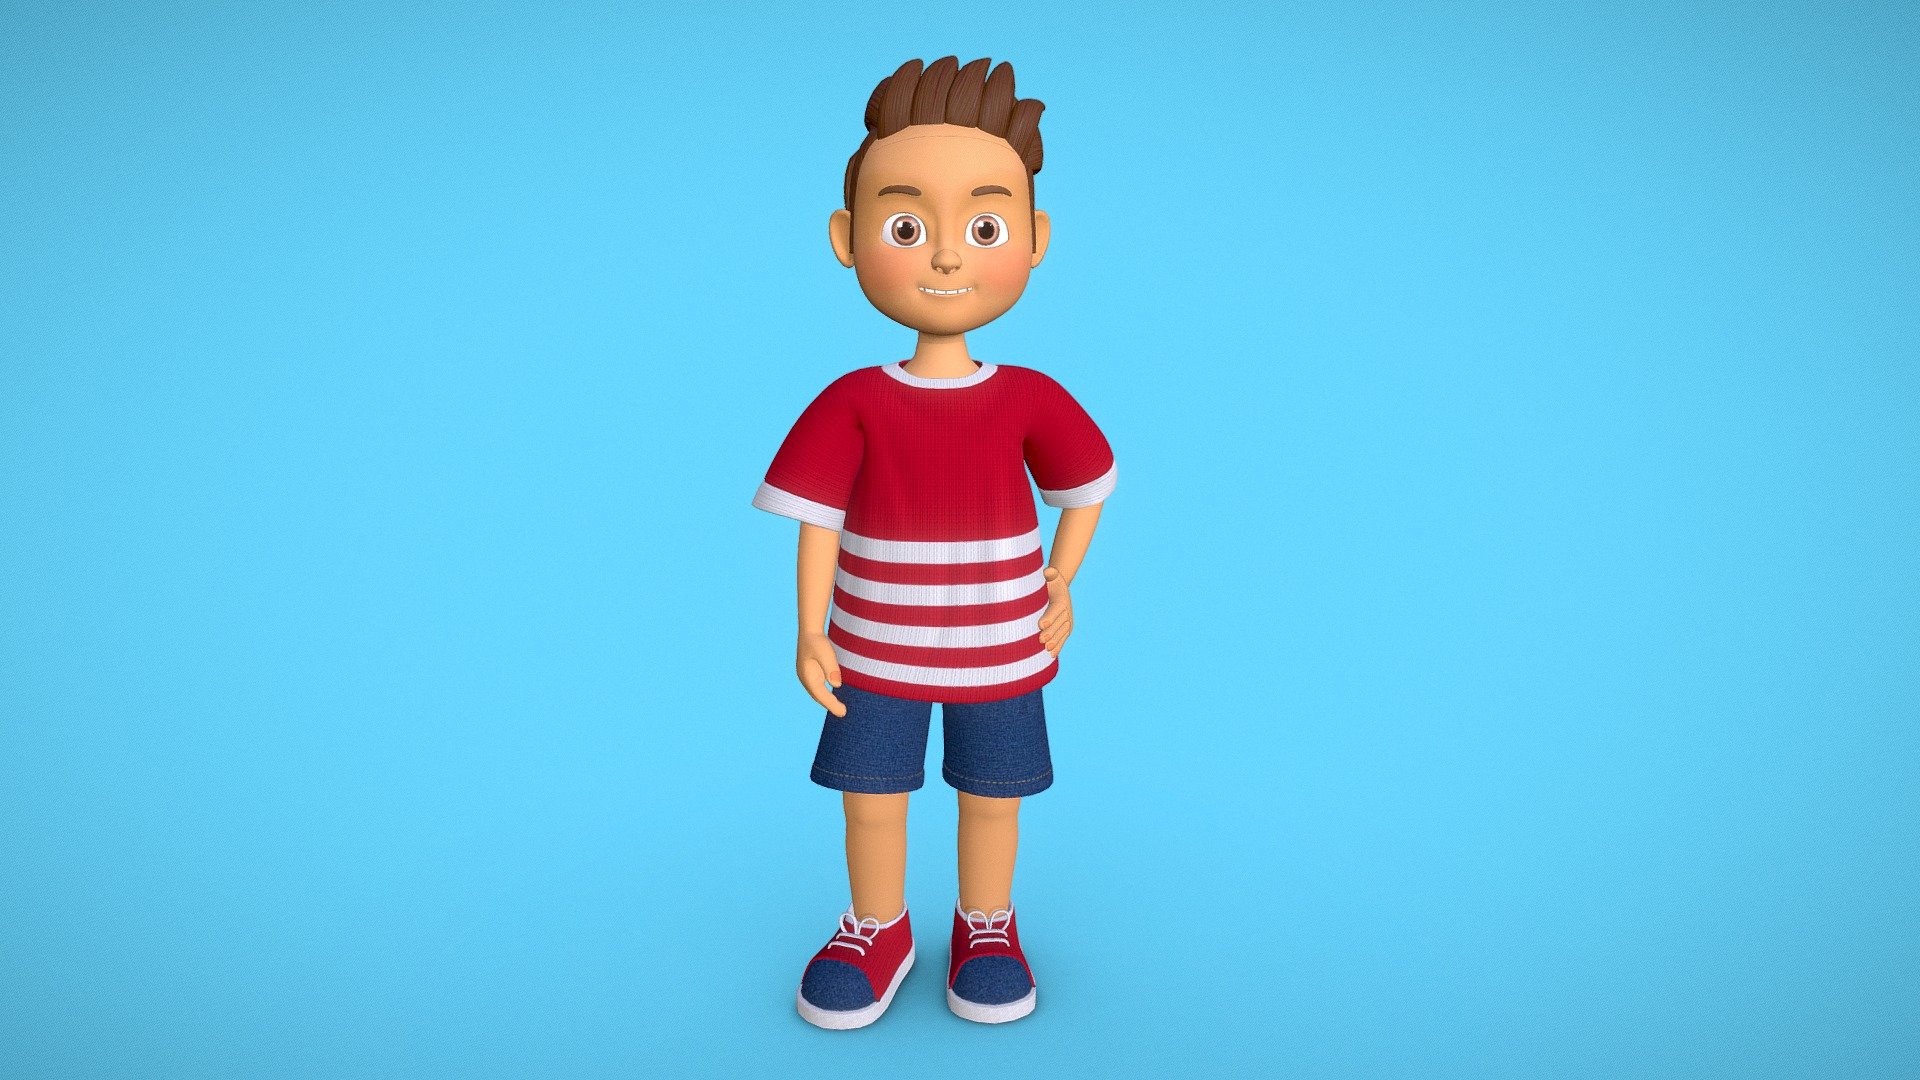 3d character modelling of boy. This boy character is ready to animate. You can use it directly for any type animation. It is created in 3ds max, Maya and substance painter. Boy character we designed to be suitable for games, cartoon, rhymes or any other project.

The model is packed with high resolution pbr textures, ready to be used in modern games or film projects. Additional custom sail poses or higher resolution textures available on demand, reach out to me for more information on that 3d model